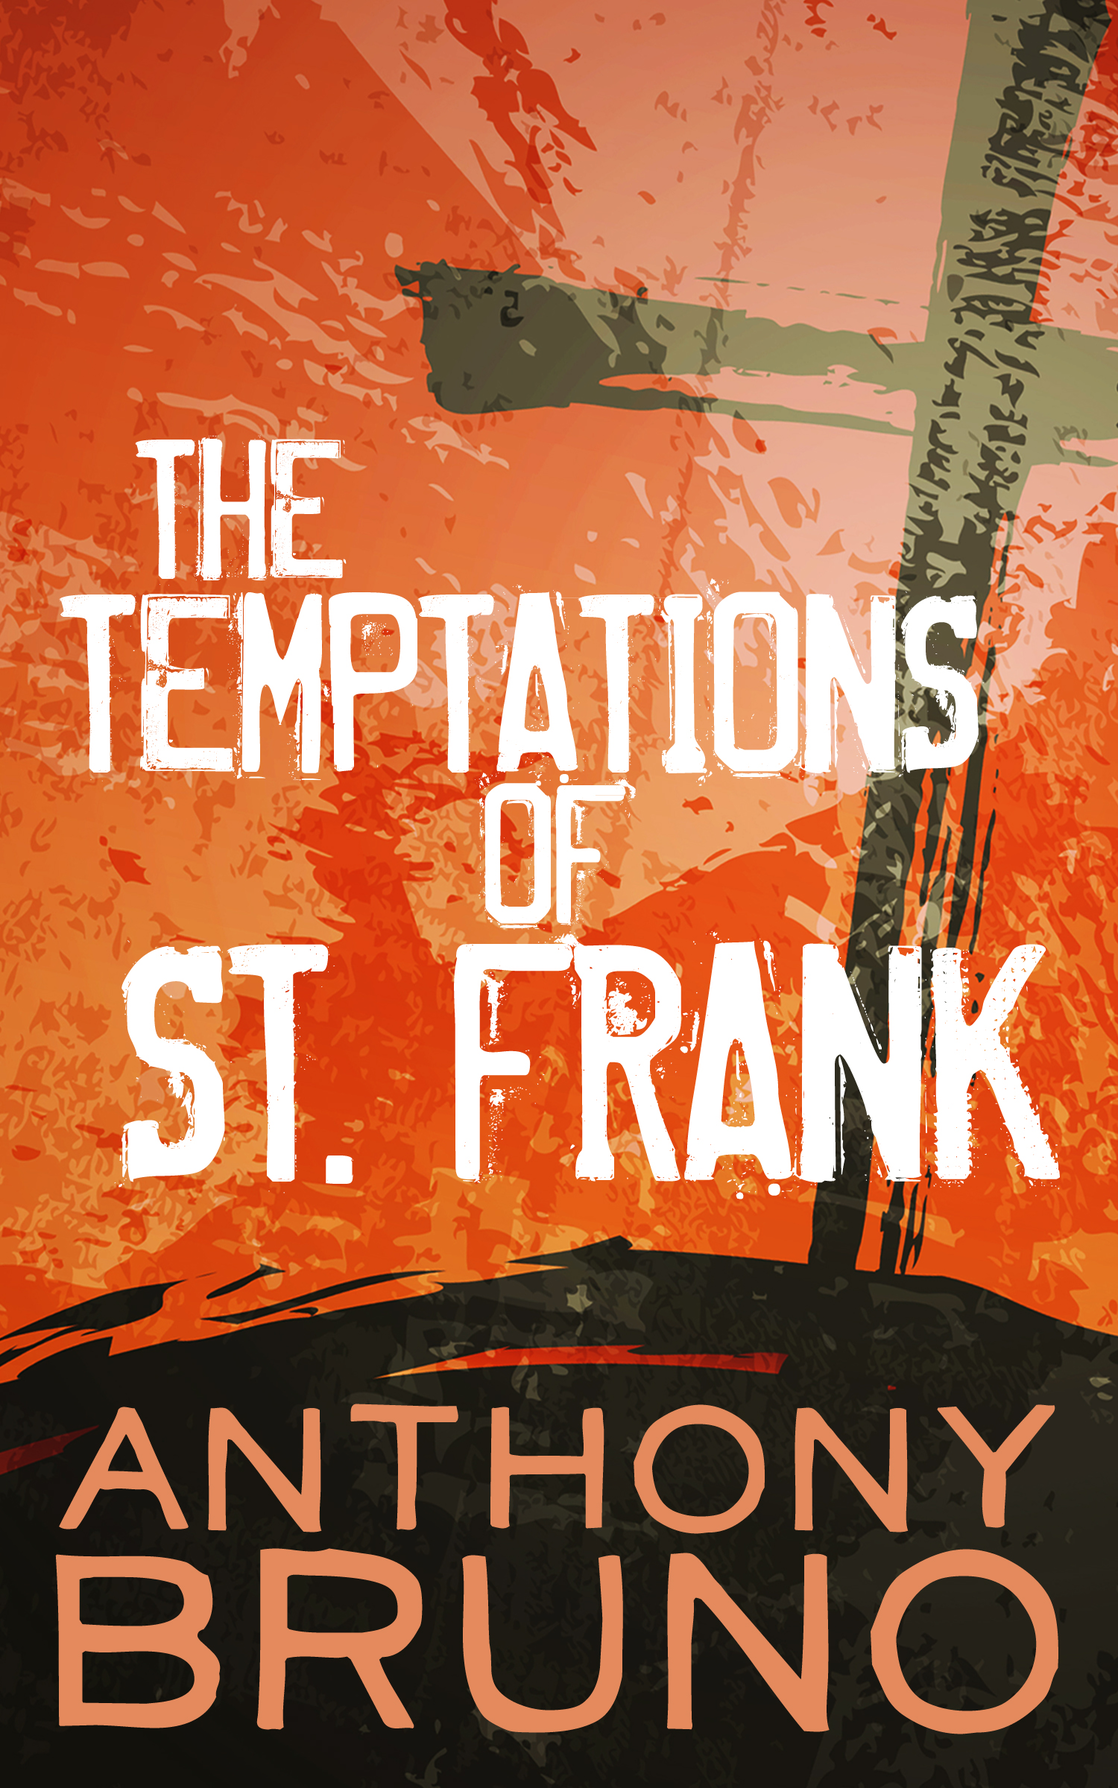 The Temptations of St. Frank (2013) by Anthony  Bruno